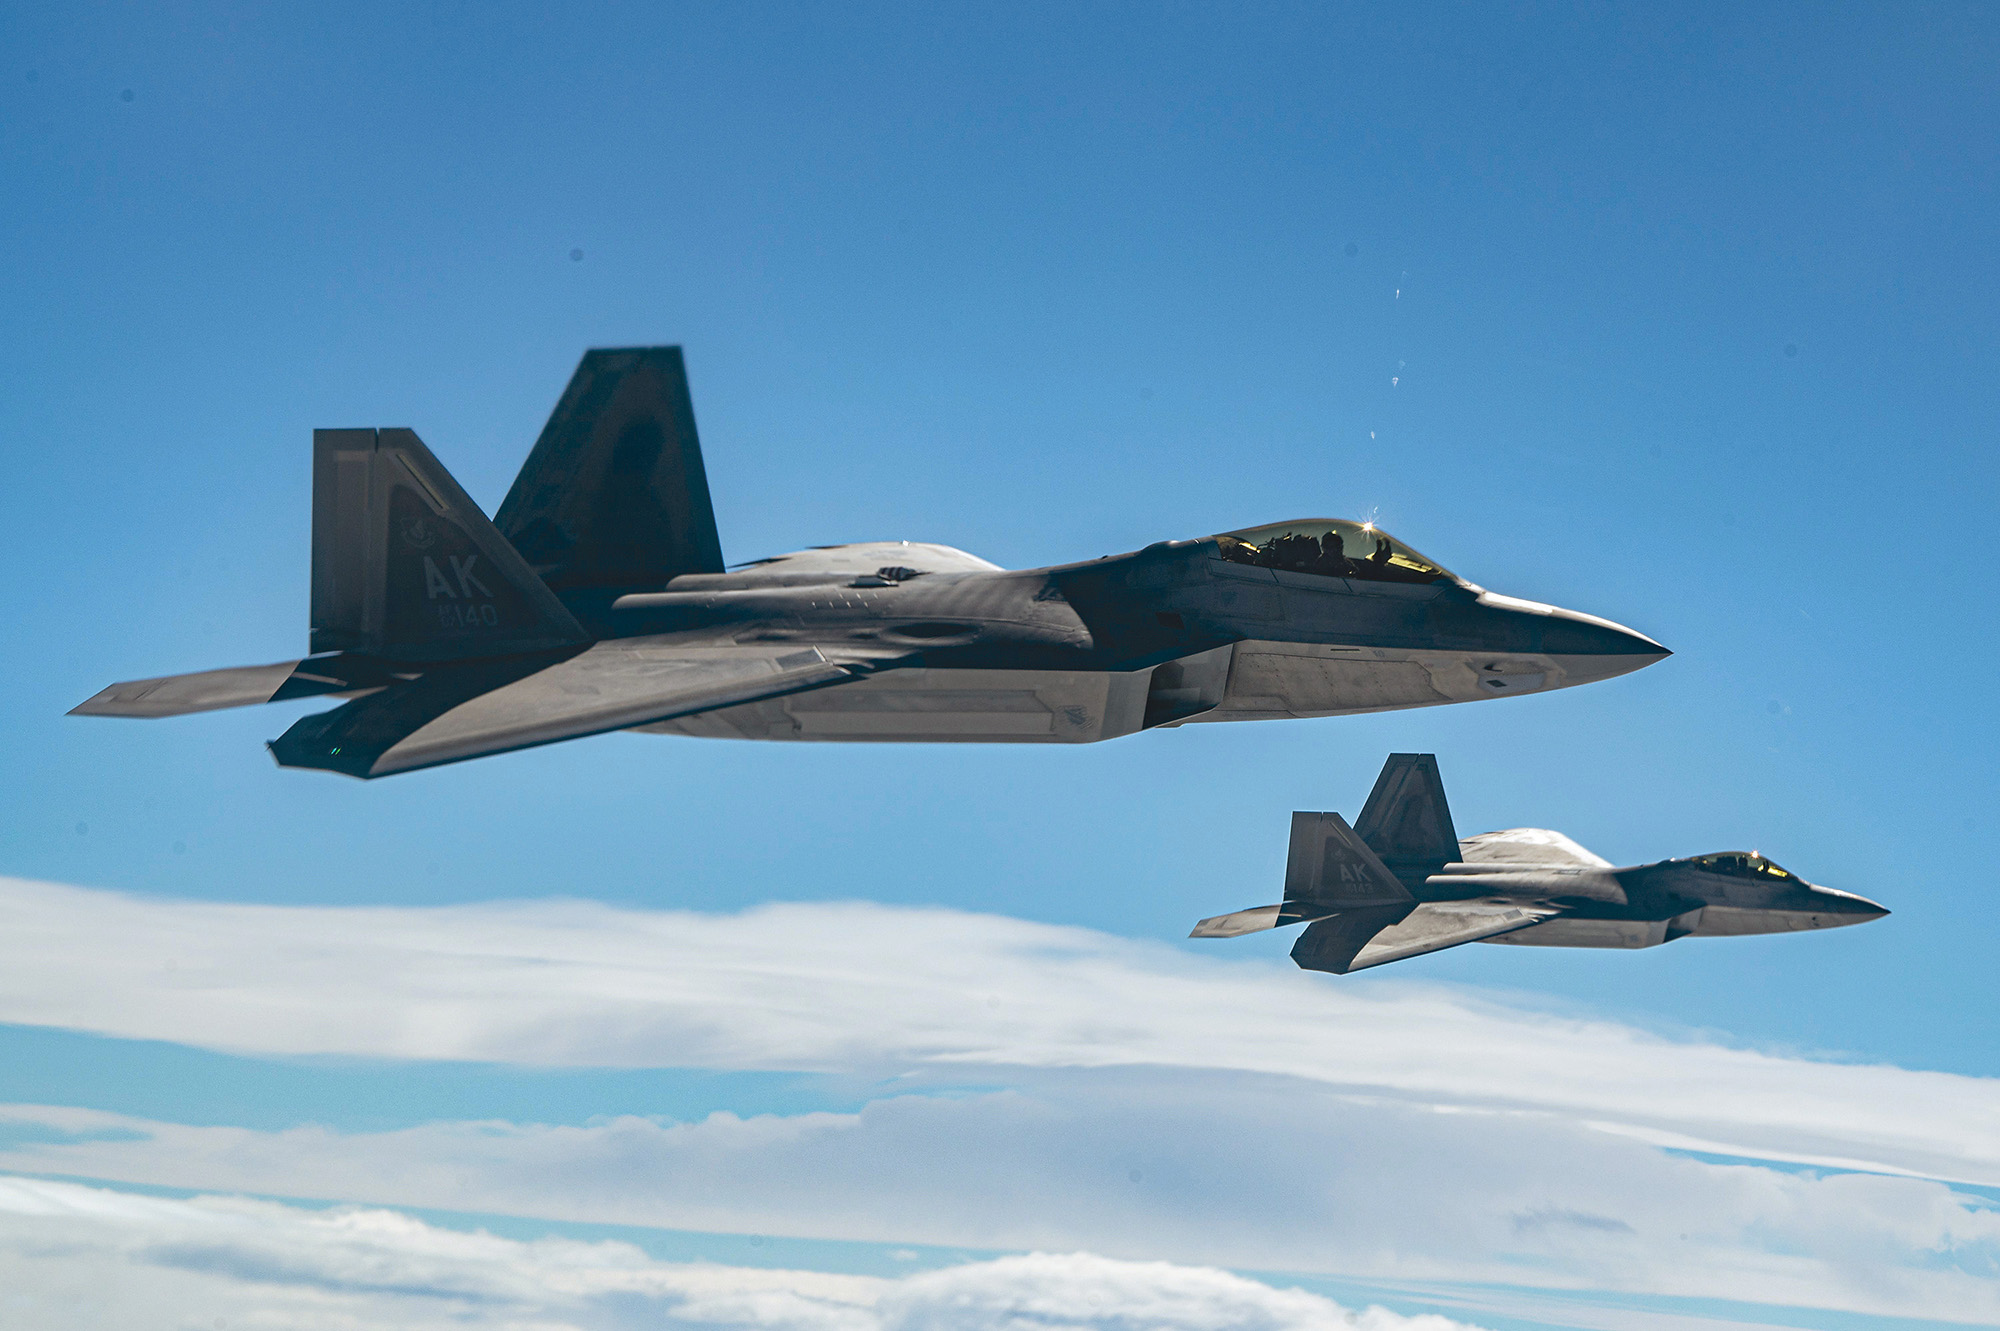 Wilsbach: Air Force Should Keep, and Not Divest, Block 20 F-22s